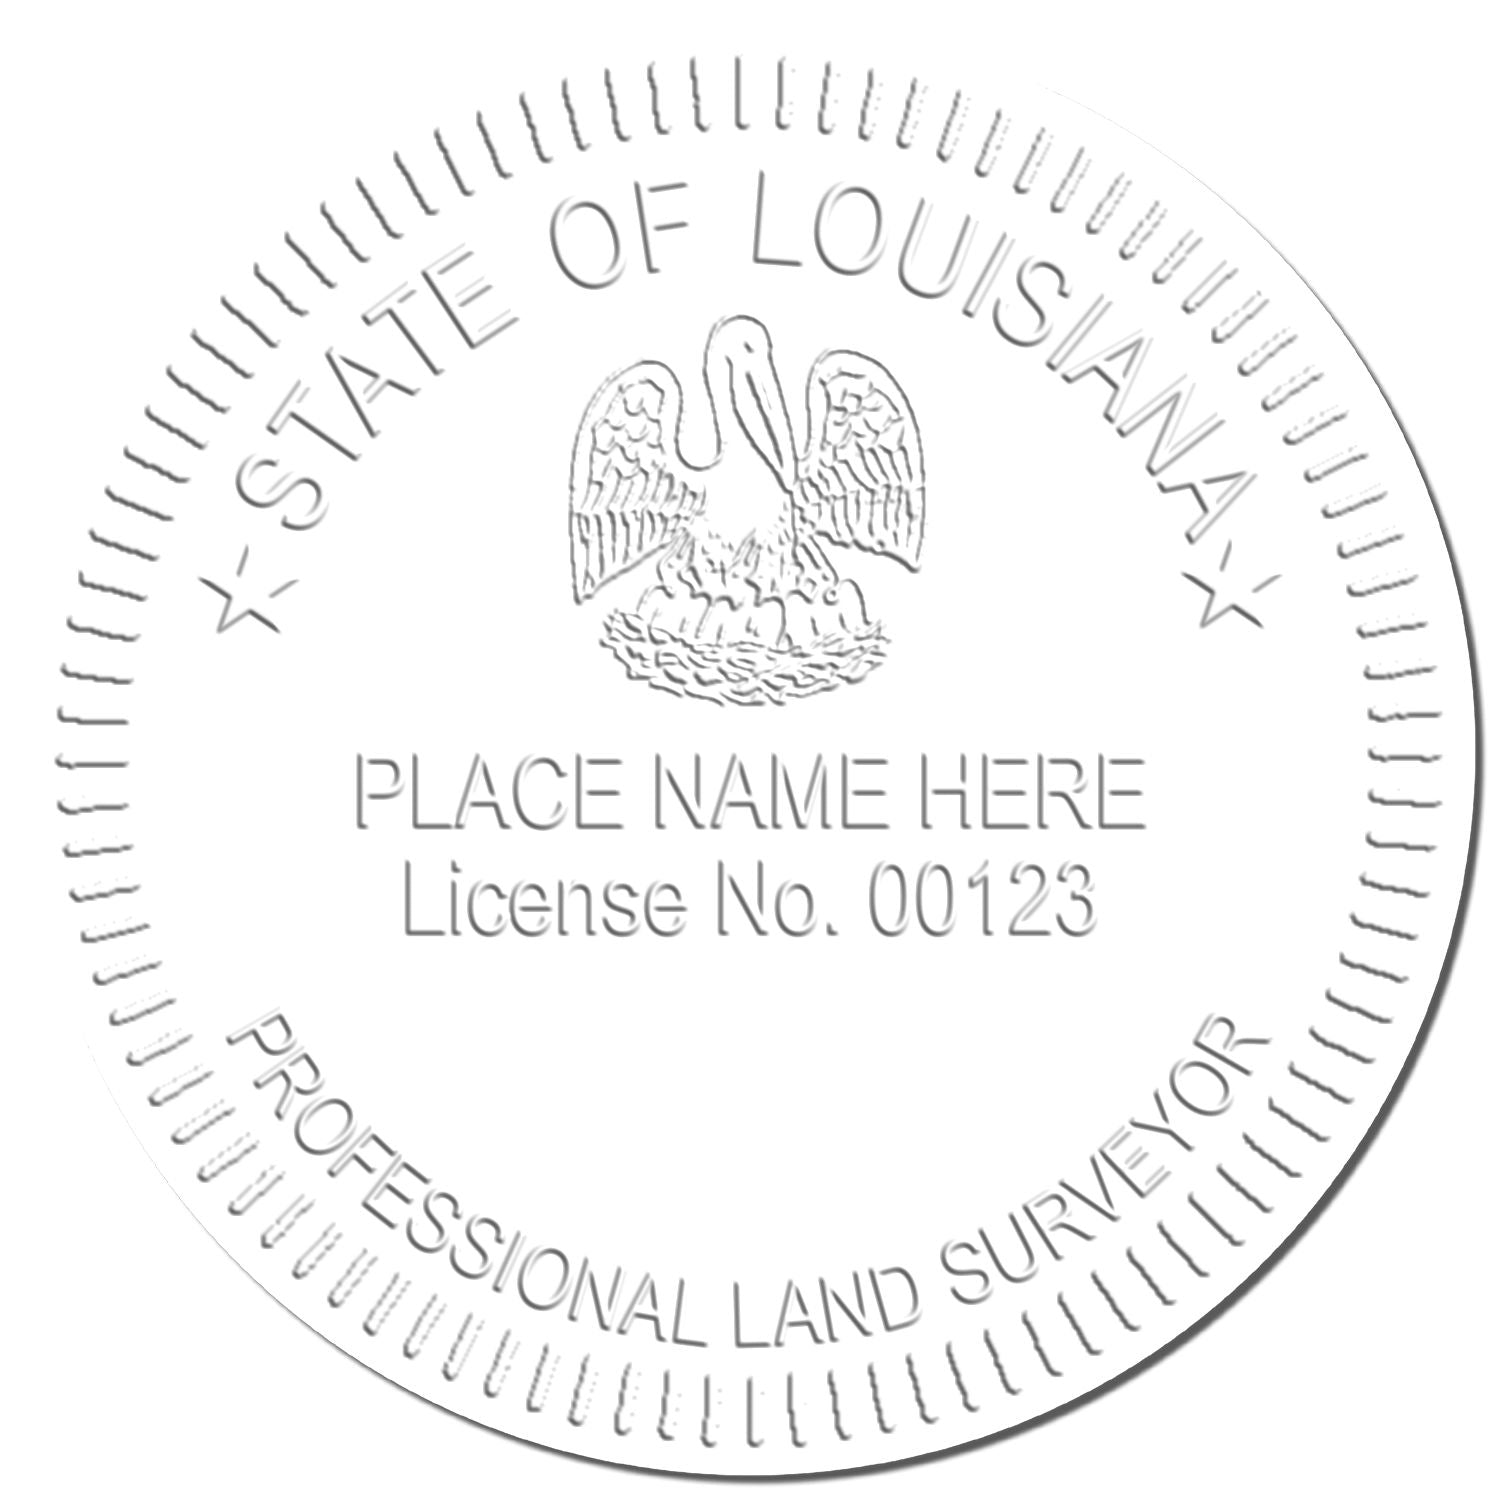 This paper is stamped with a sample imprint of the Long Reach Louisiana Land Surveyor Seal, signifying its quality and reliability.